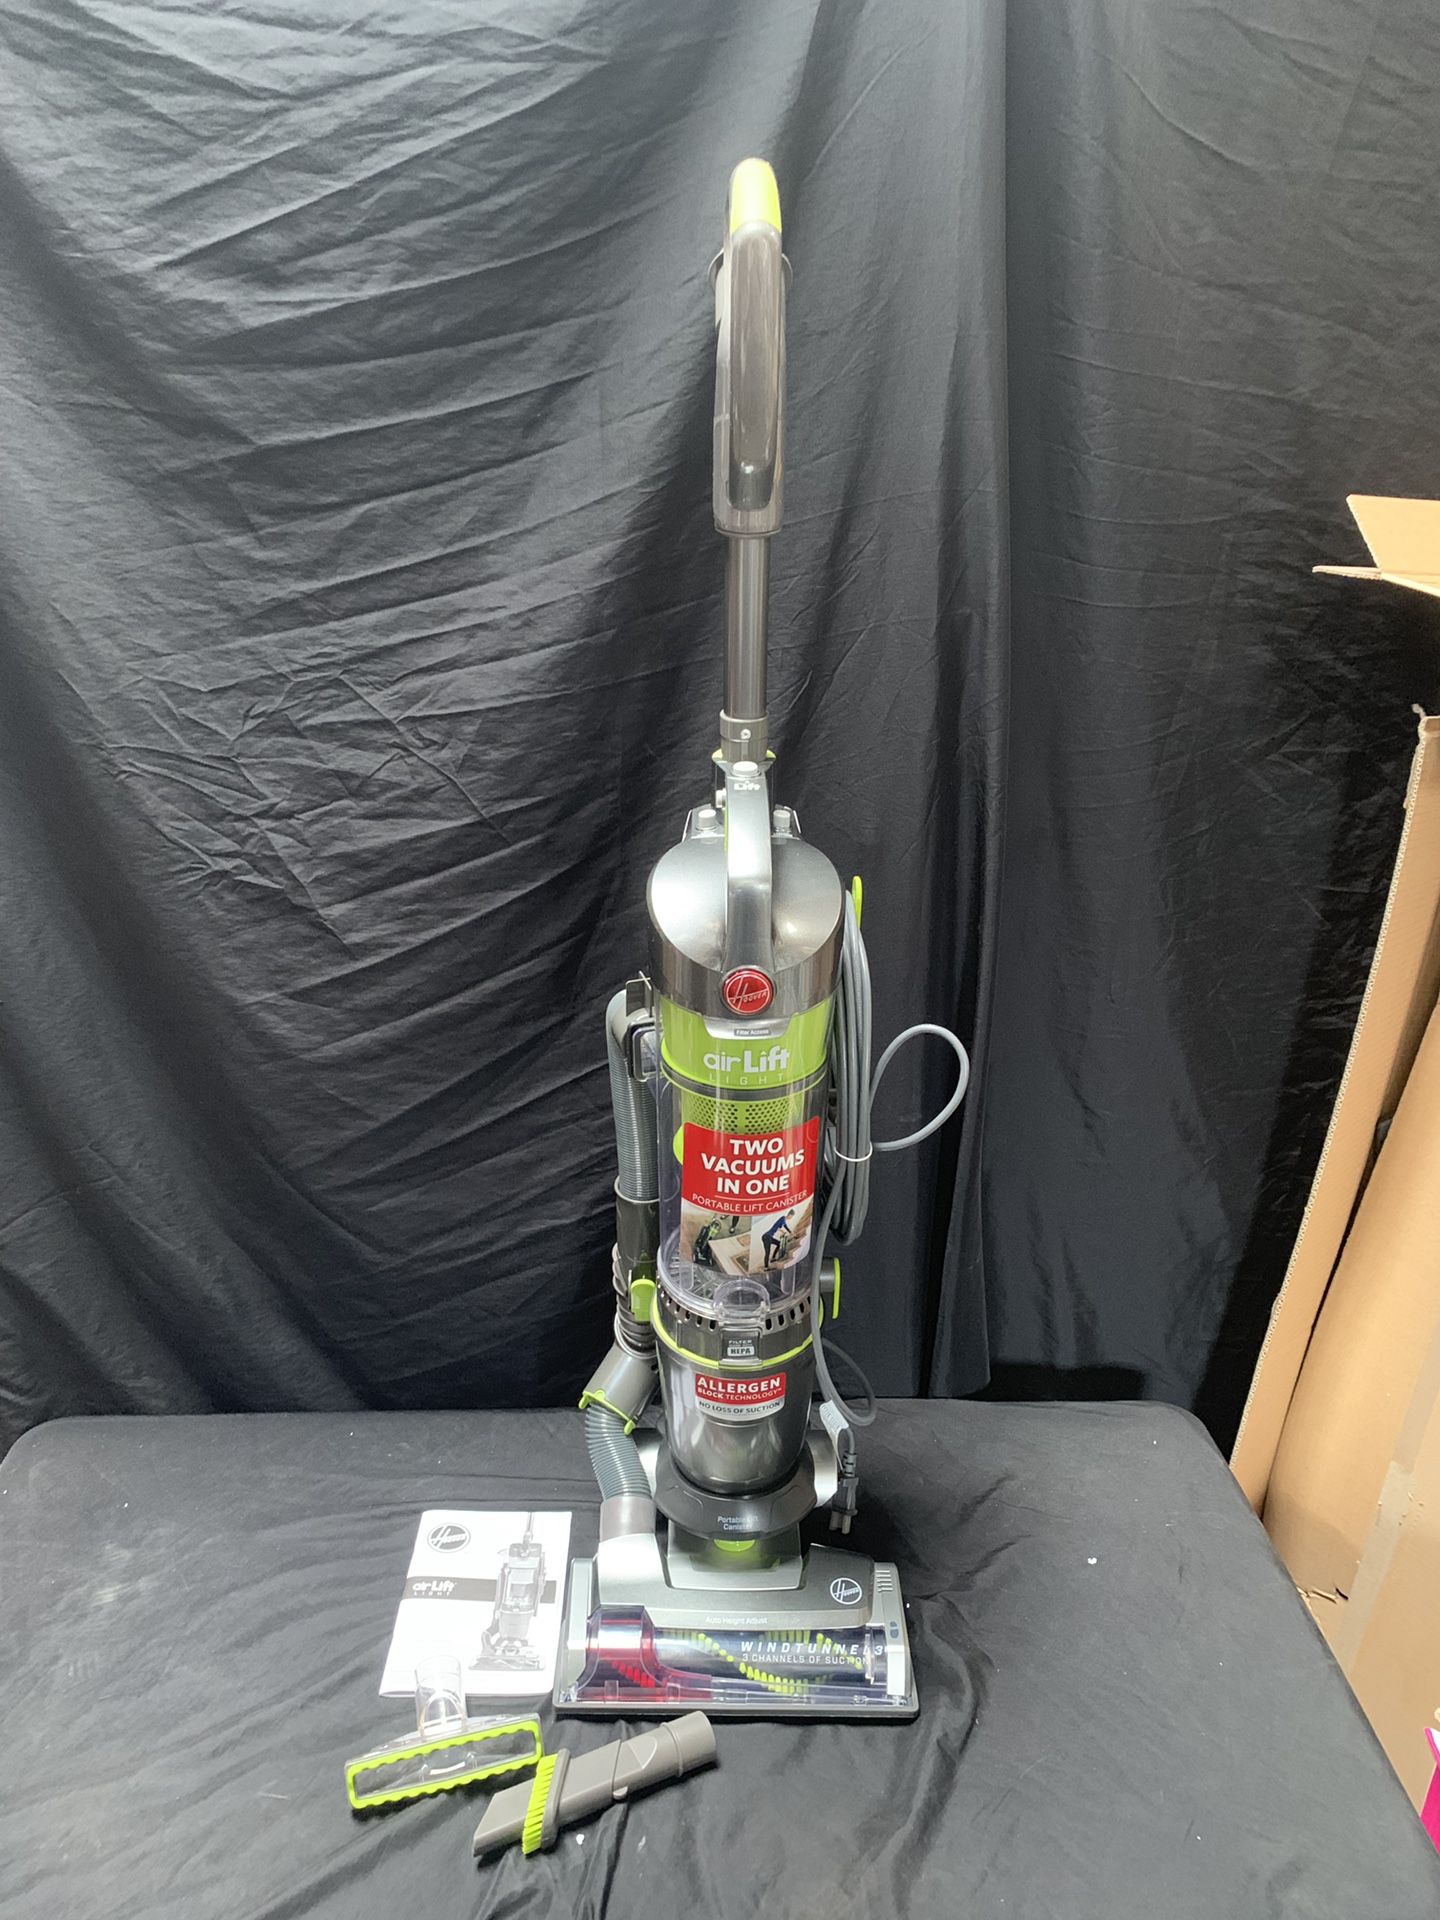 Hoover Air Lift Light Floor to Ceiling Upright Bagless Vacuum